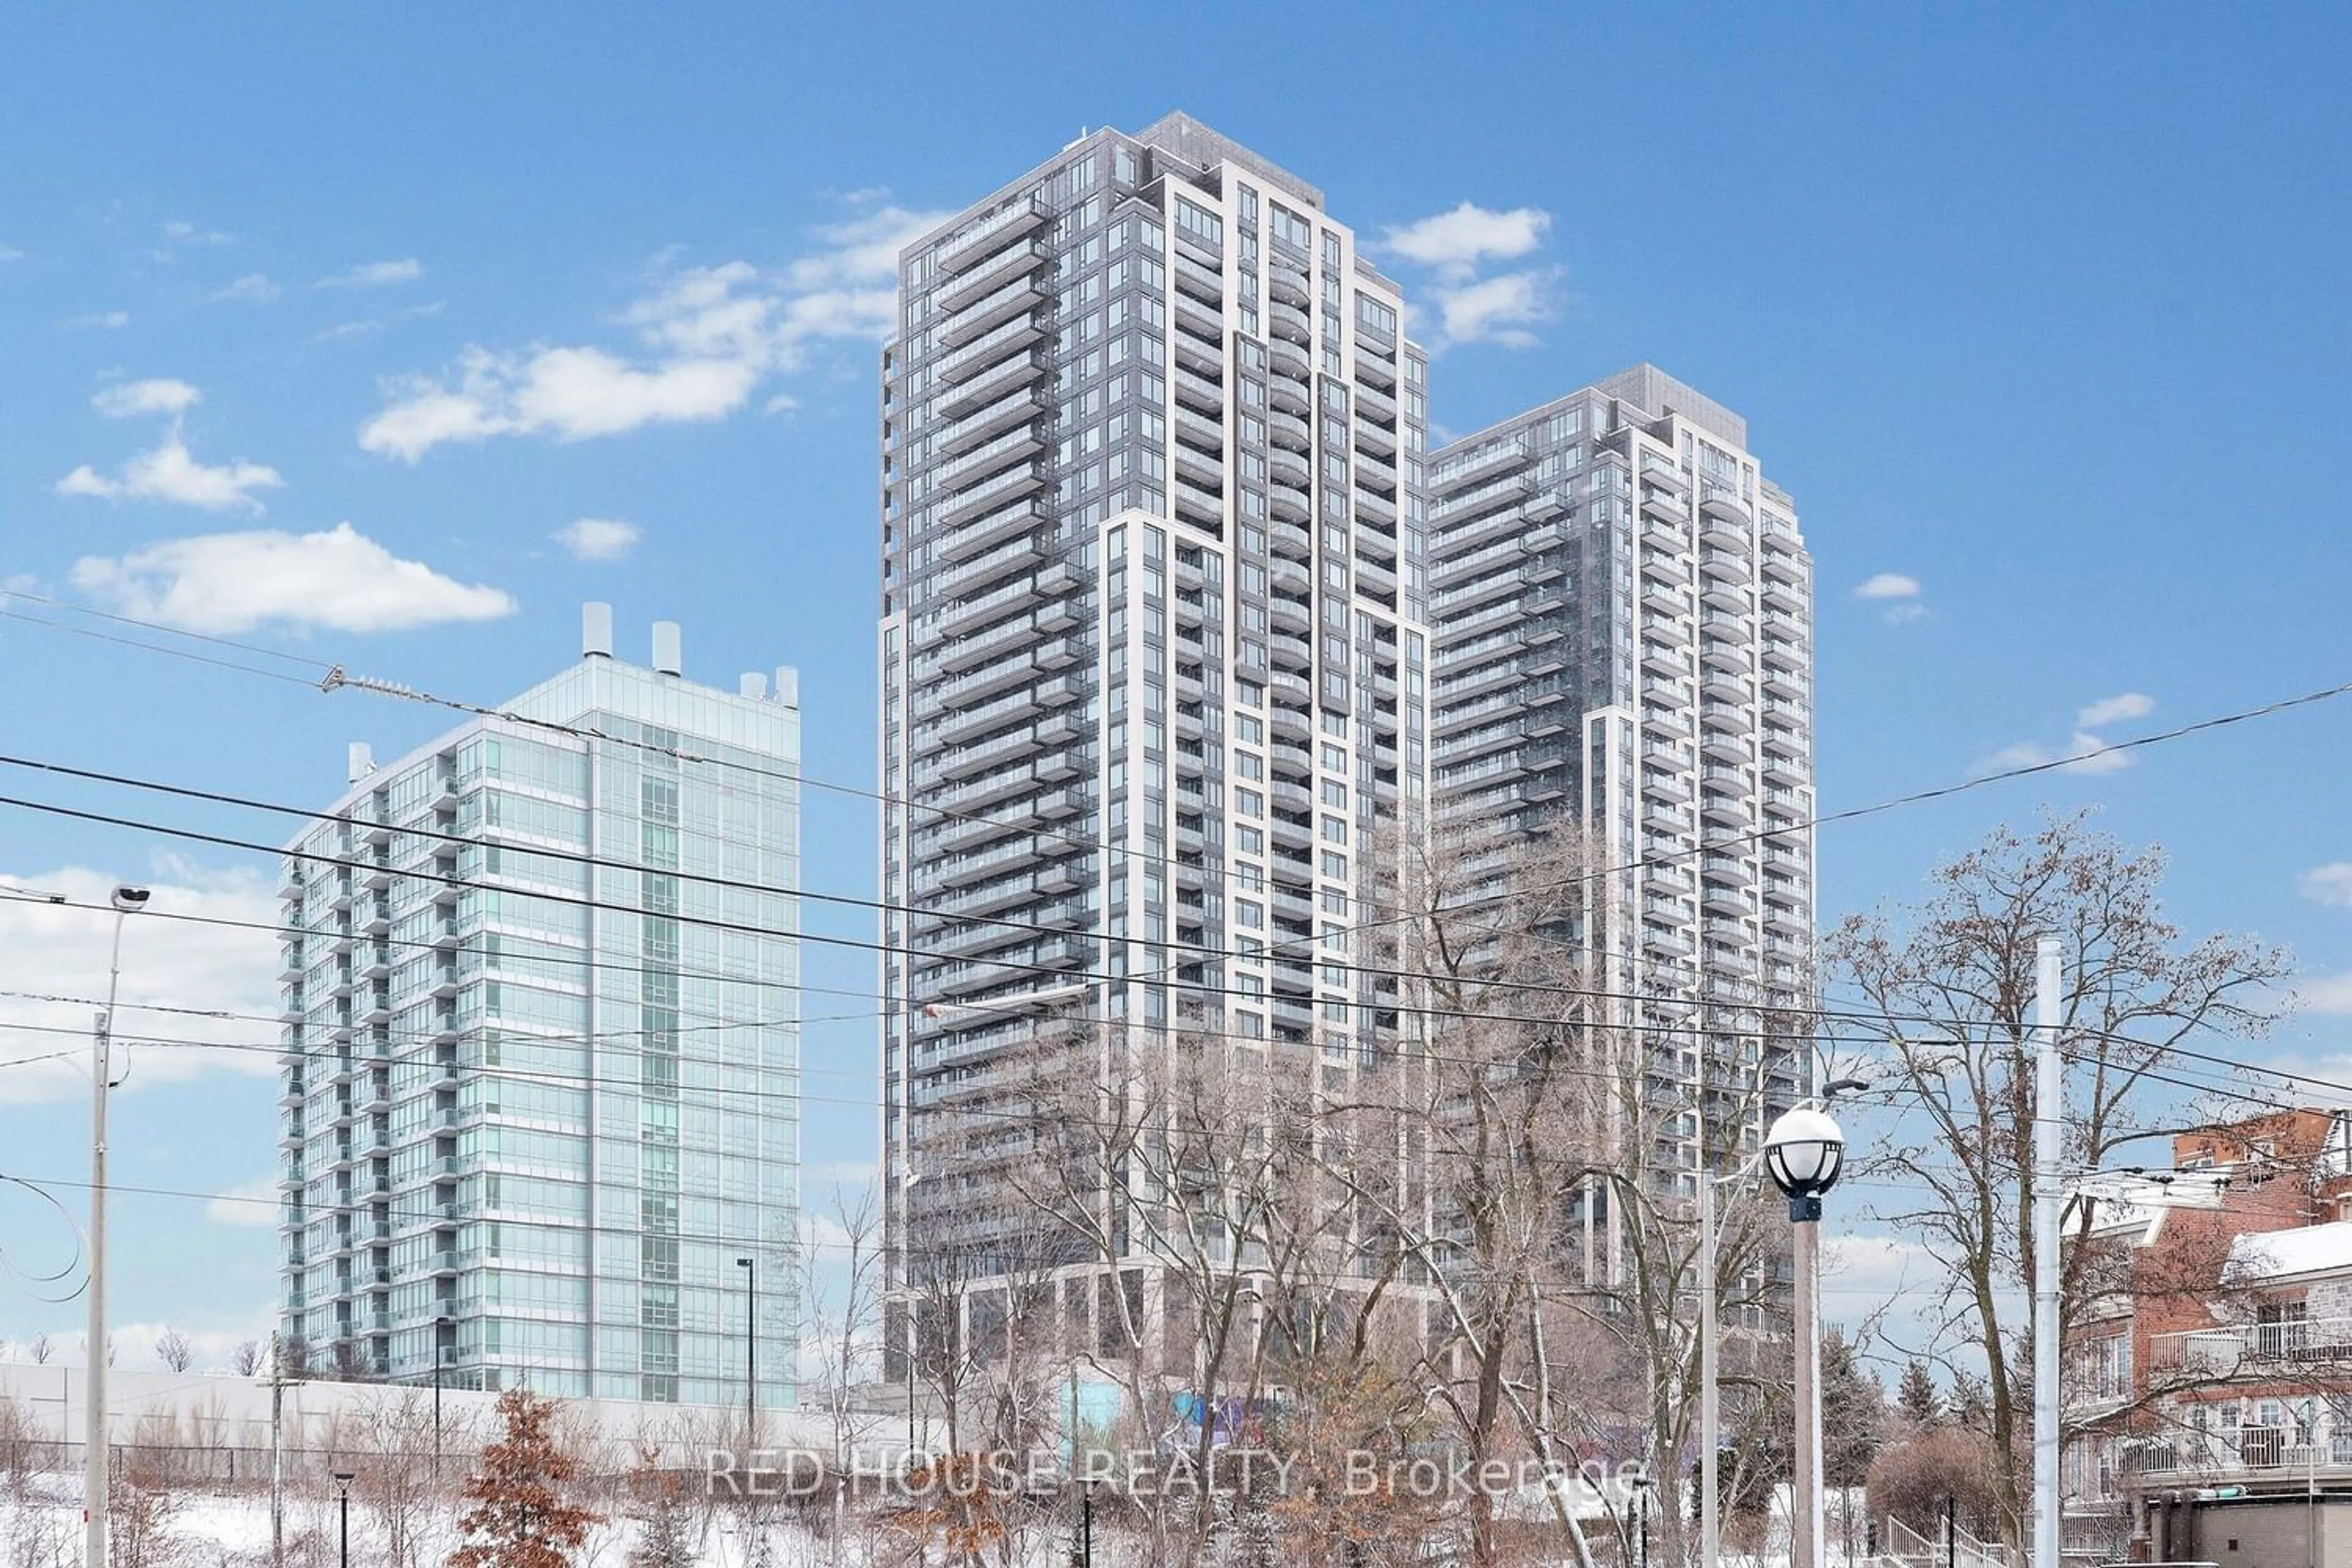 A pic from exterior of the house or condo for 1926 Lakeshore Blvd #3915, Toronto Ontario M6S 1A1